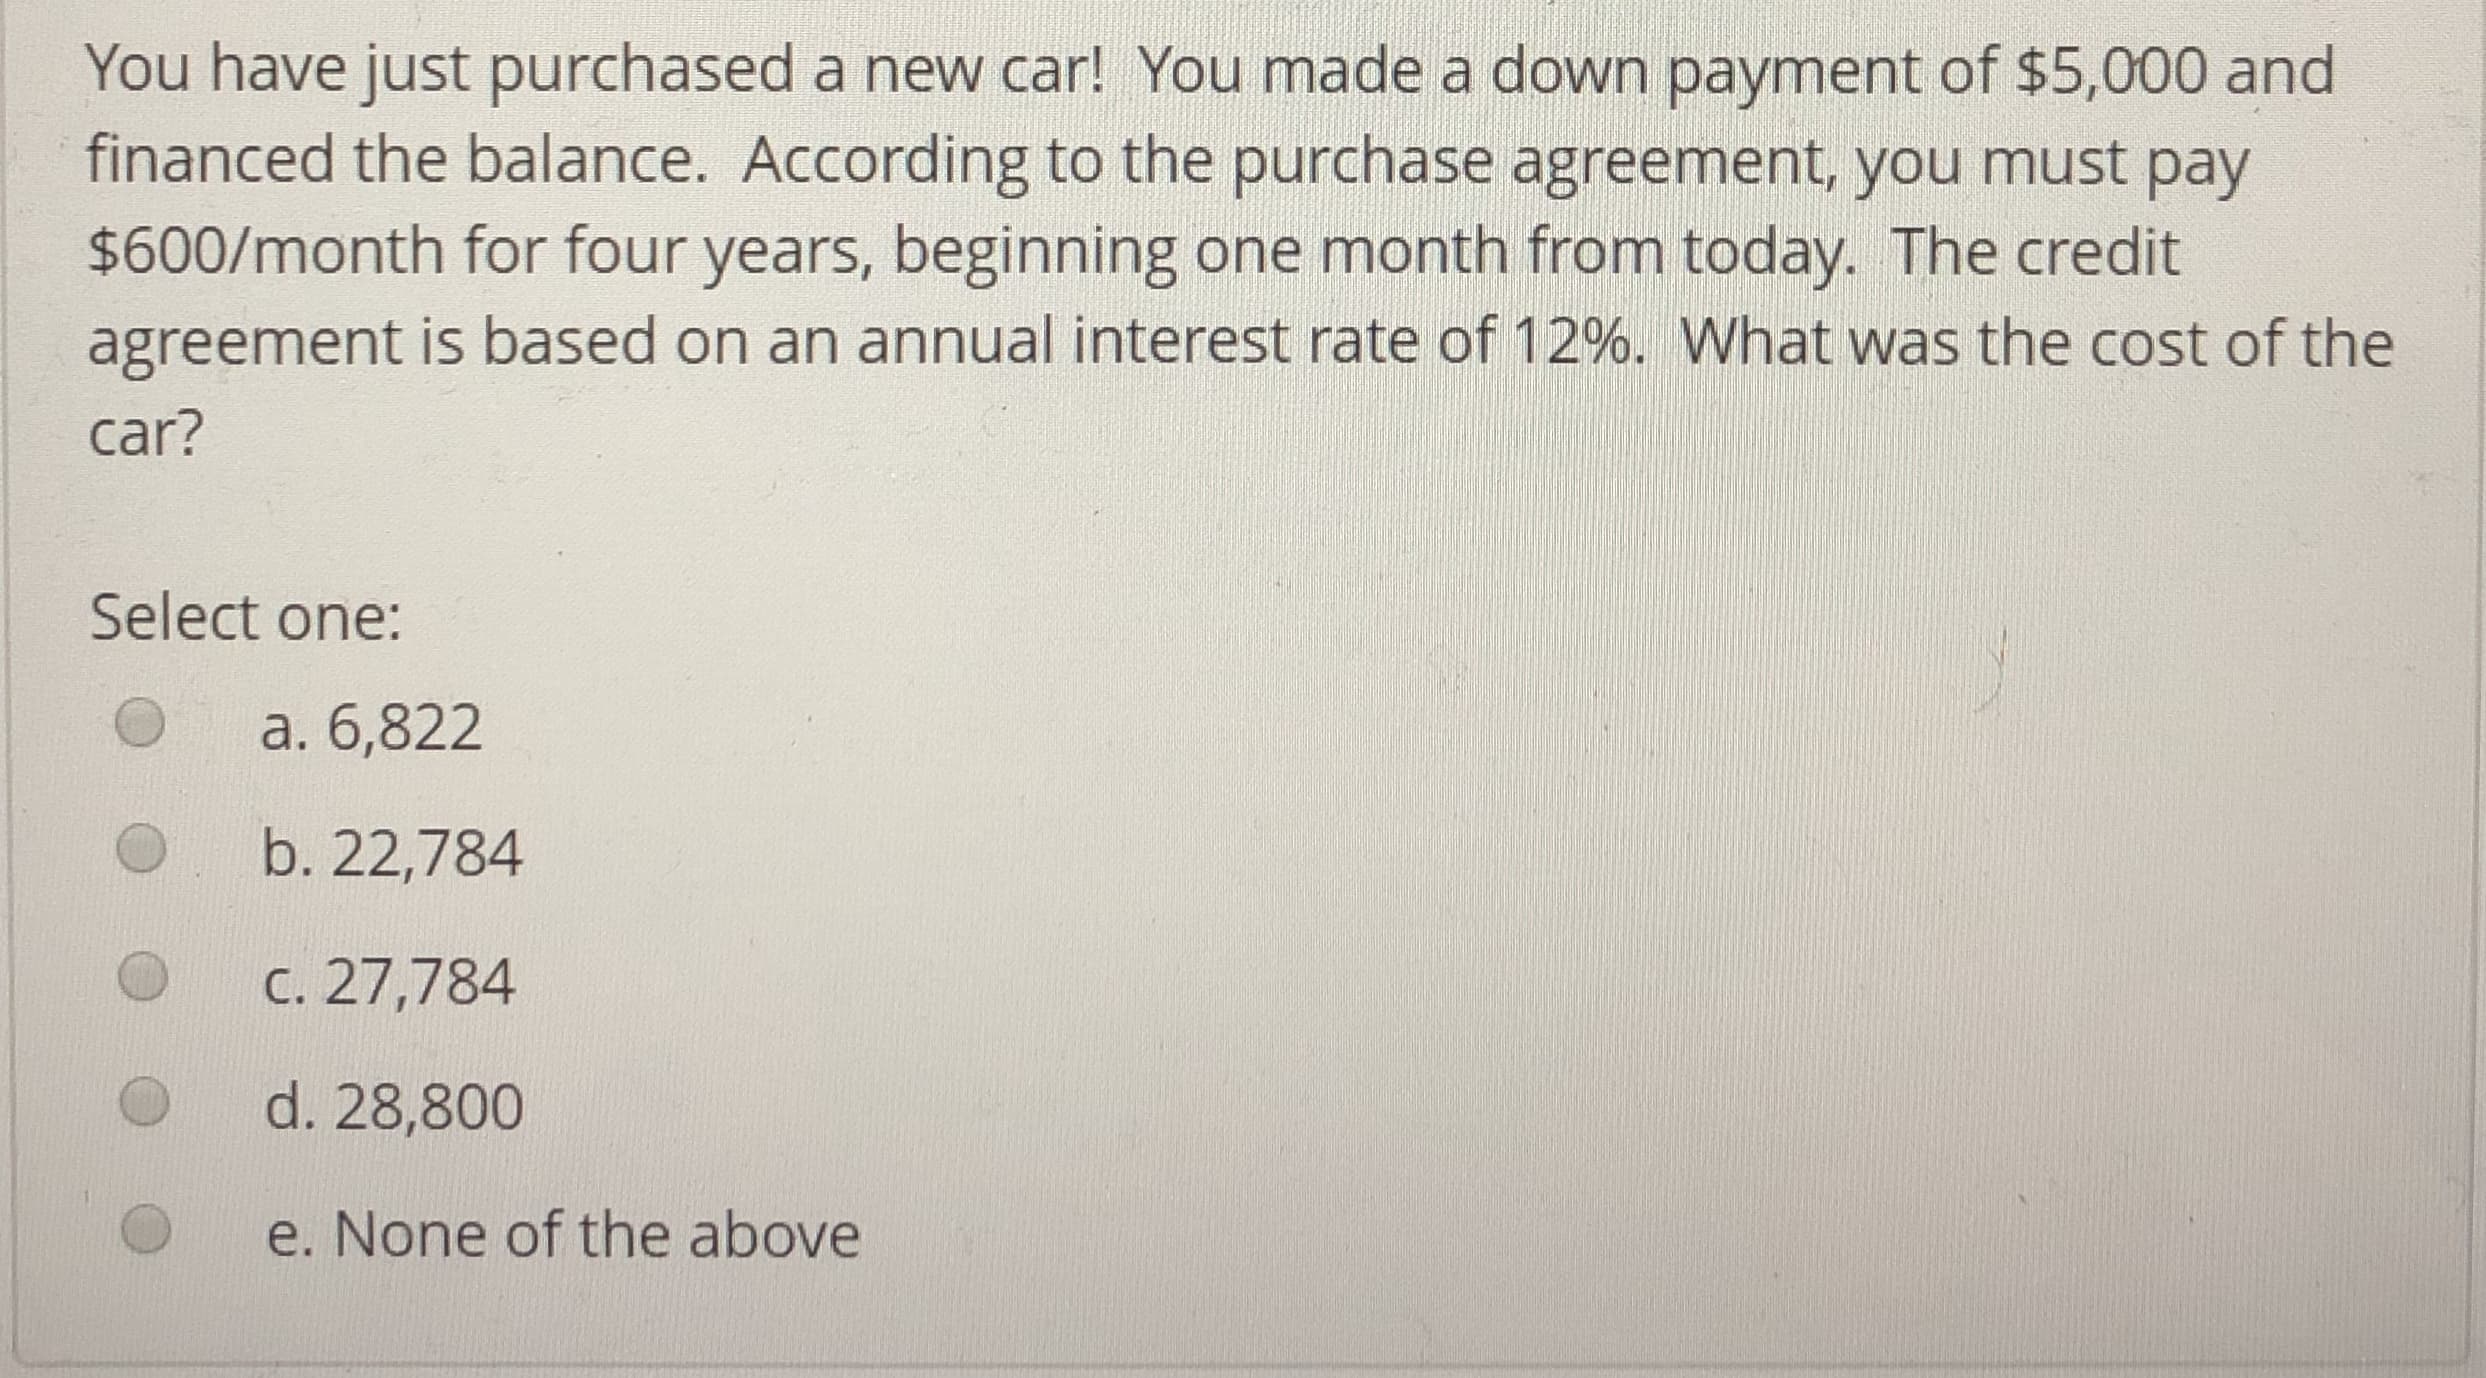 You have just purchased a new car! You made a down payment of $5,000 and
financed the balance. According to the purchase agreement, you must pay
$600/month for four years, beginning one month from today. The credit
agreement is based on an annual interest rate of 12%. What was the cost of the
car?
Select one:
O a. 6,822
O b. 22,784
с.27 ,784
d. 28,800
e. None of the above
O
